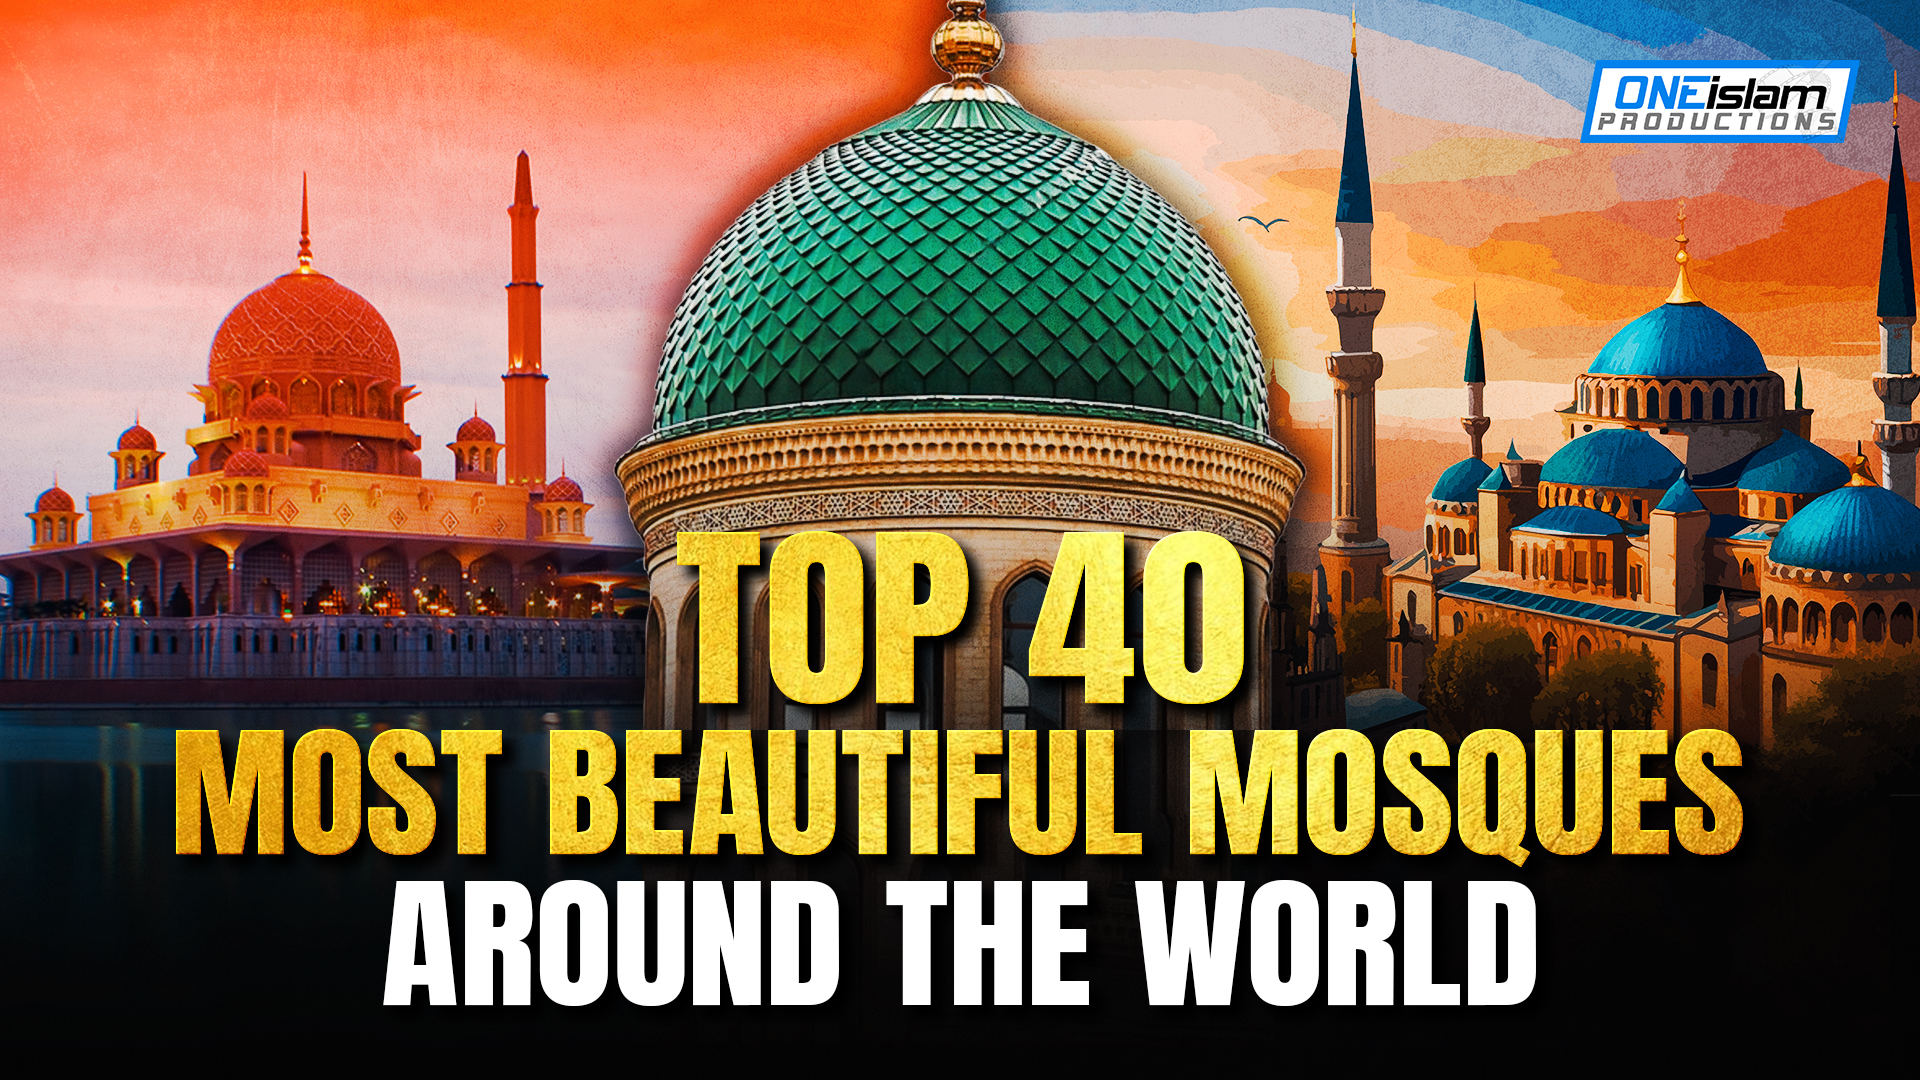 Top 50 most beautiful mosques around the world (1)